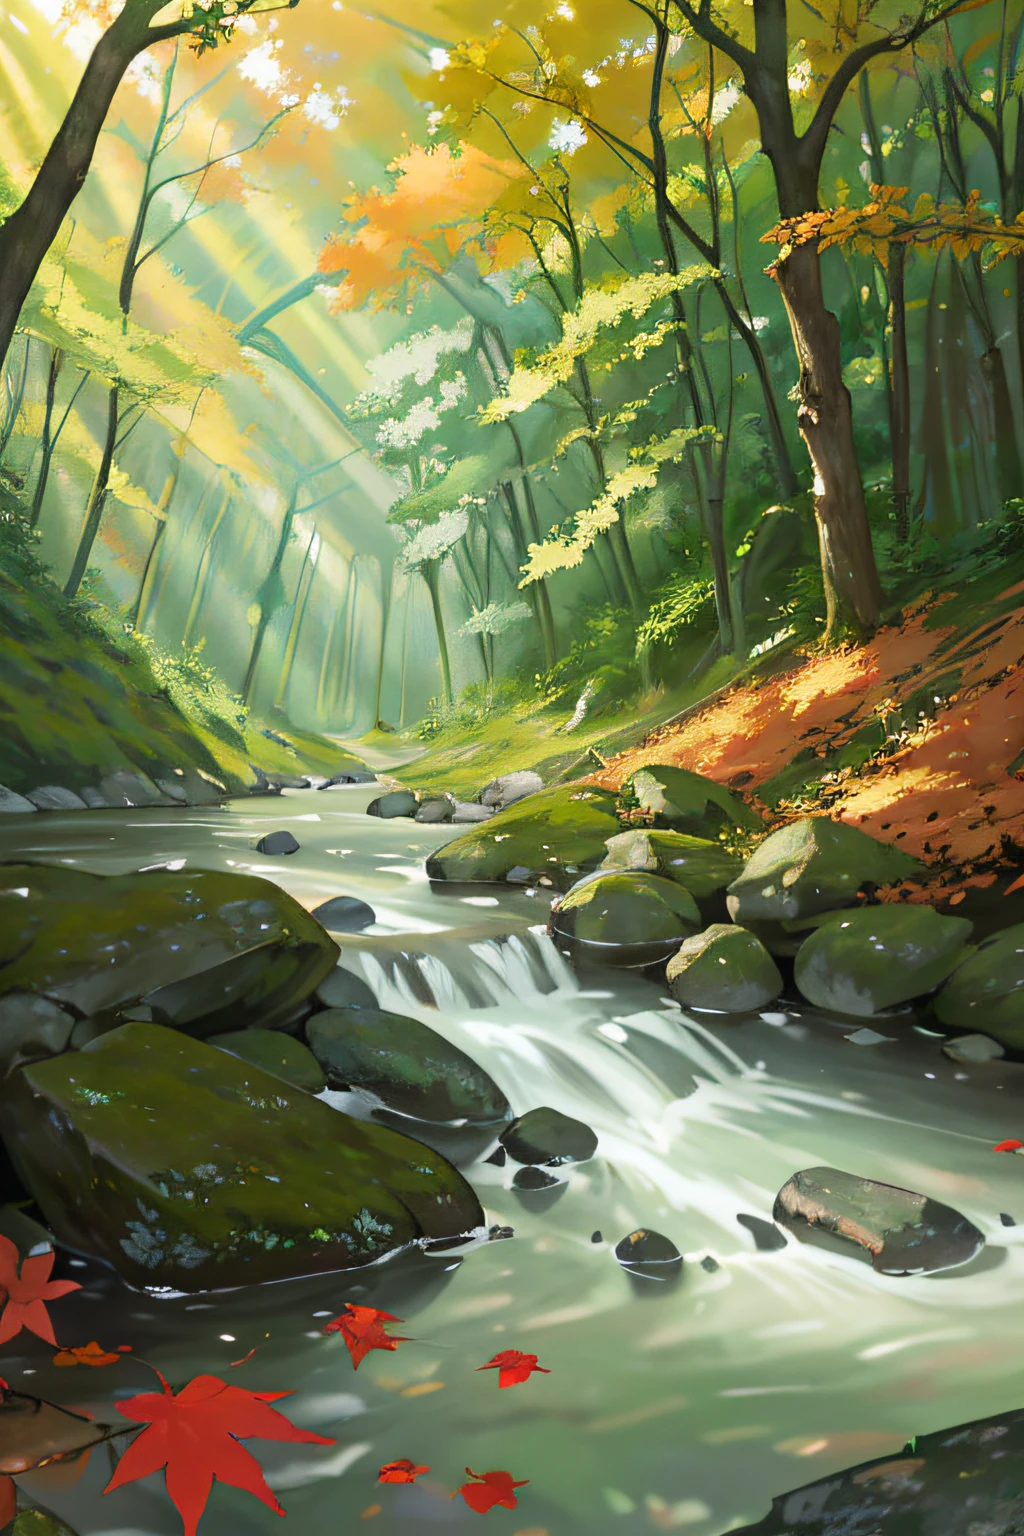 Forest
Stream
River
Spirit
Beautiful light
Leaves
Natural beauty
Wonder
Magic
Red leaves
Yellow leaves
Green forest
Light effects
Mystical ambiance
Water surface
River rocks
Shadows
Composition
Otherworldly experience